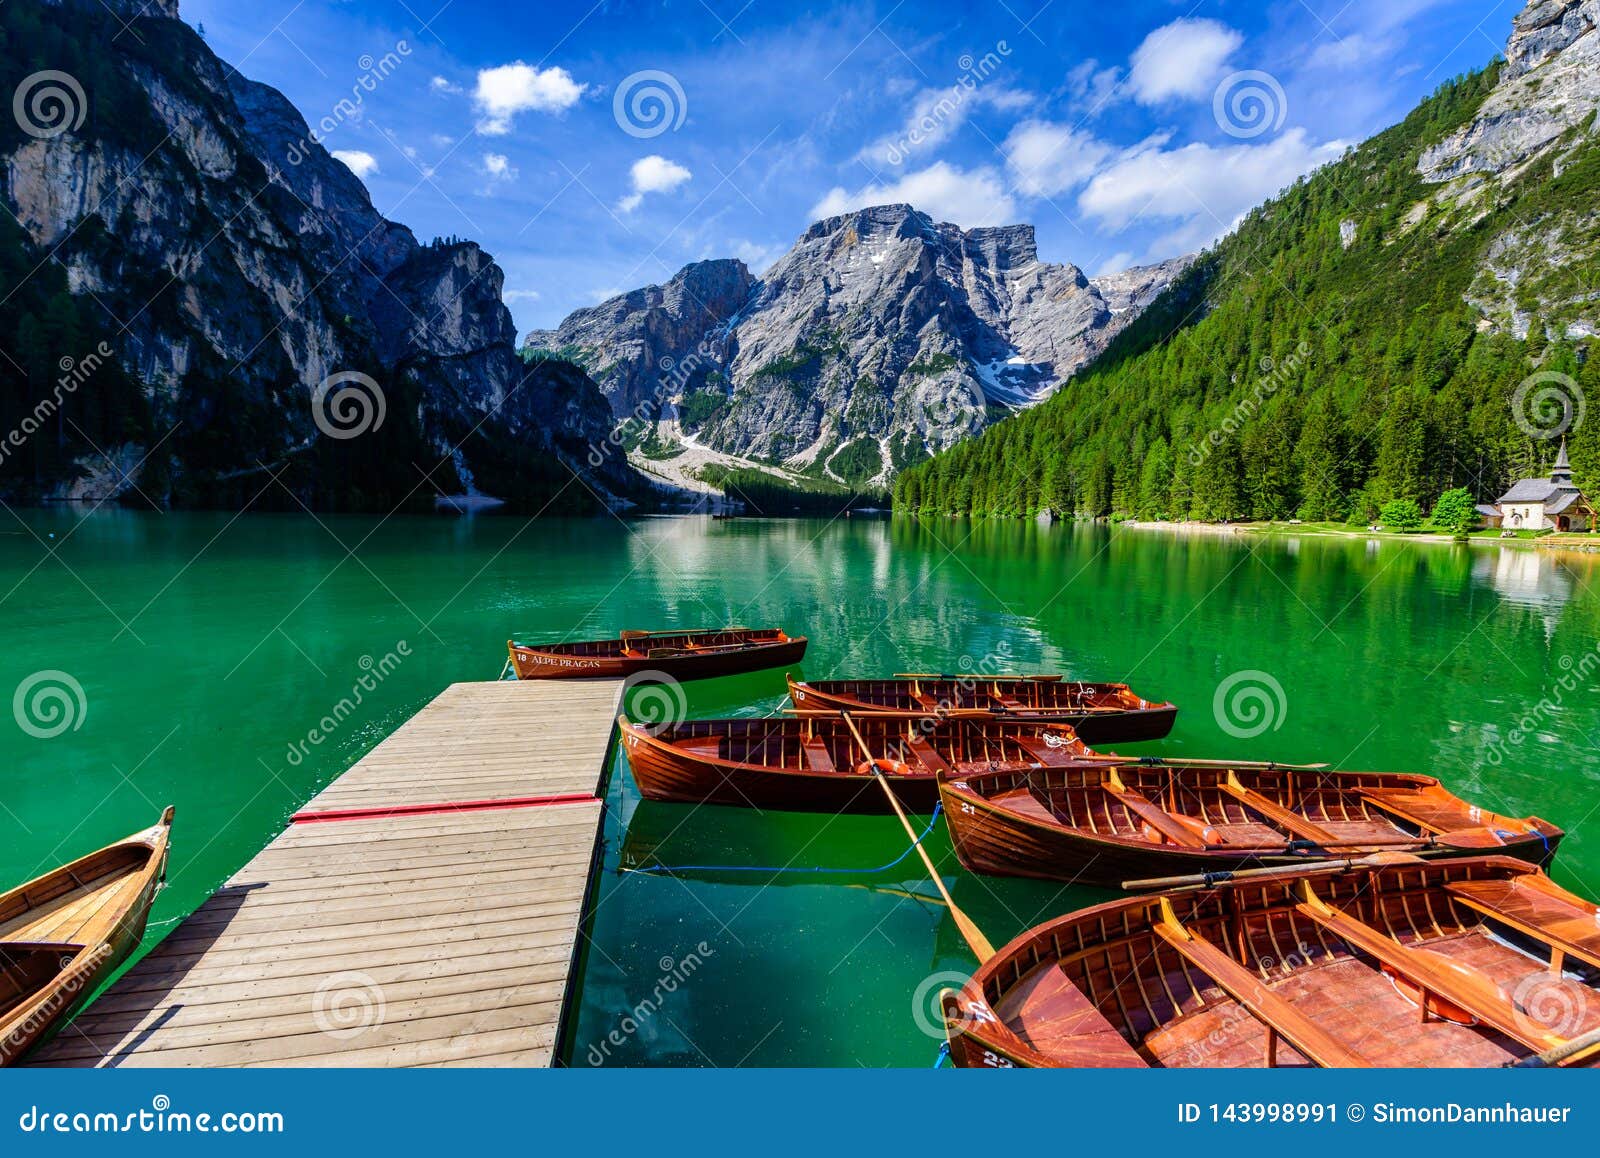 lake braies (also known as pragser wildsee or lago di braies) in dolomites mountains, sudtirol, italy. romantic place with typical